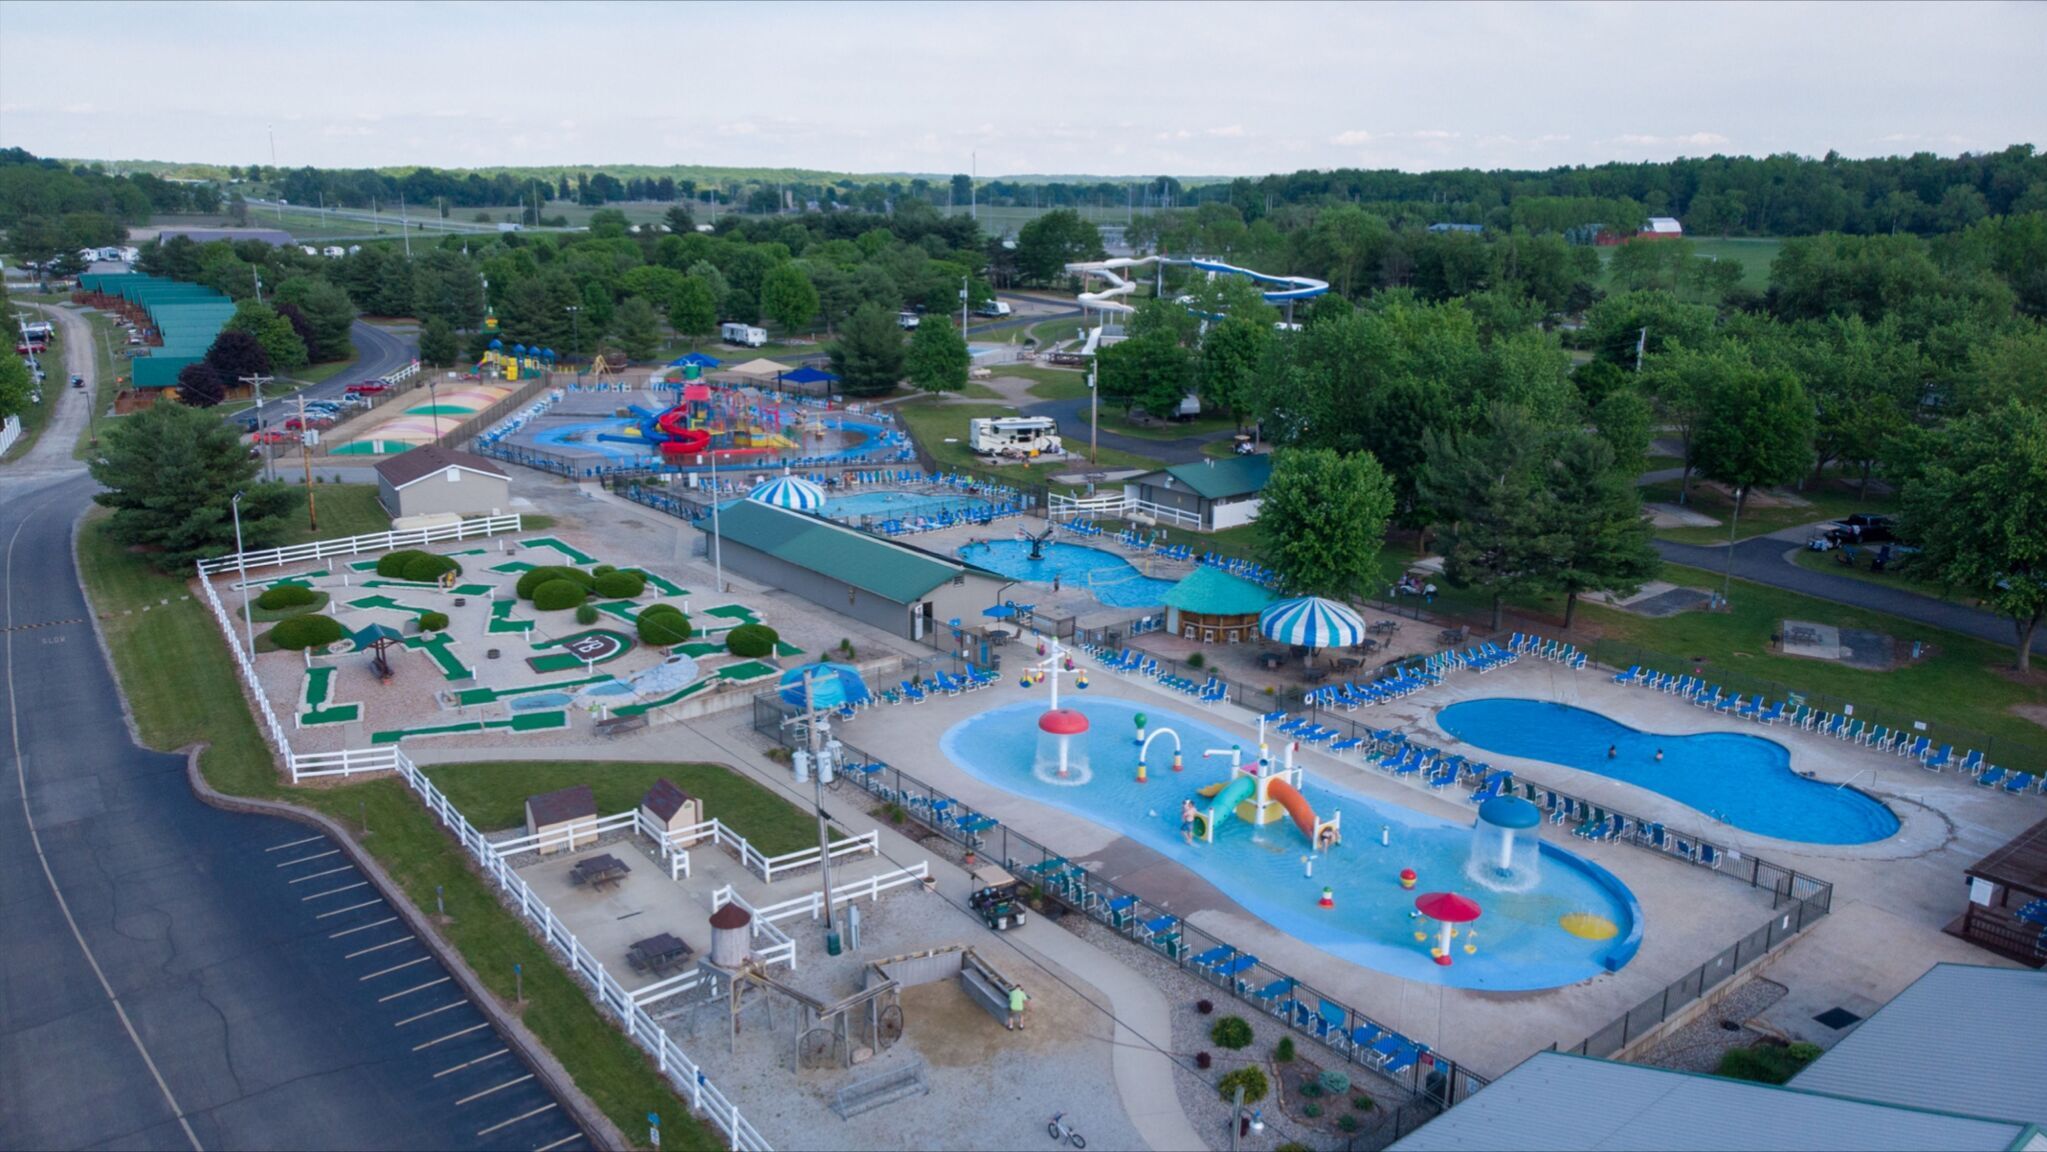 An image of pools, putt putt golf and bouncing pillows at Jellystone Park. 